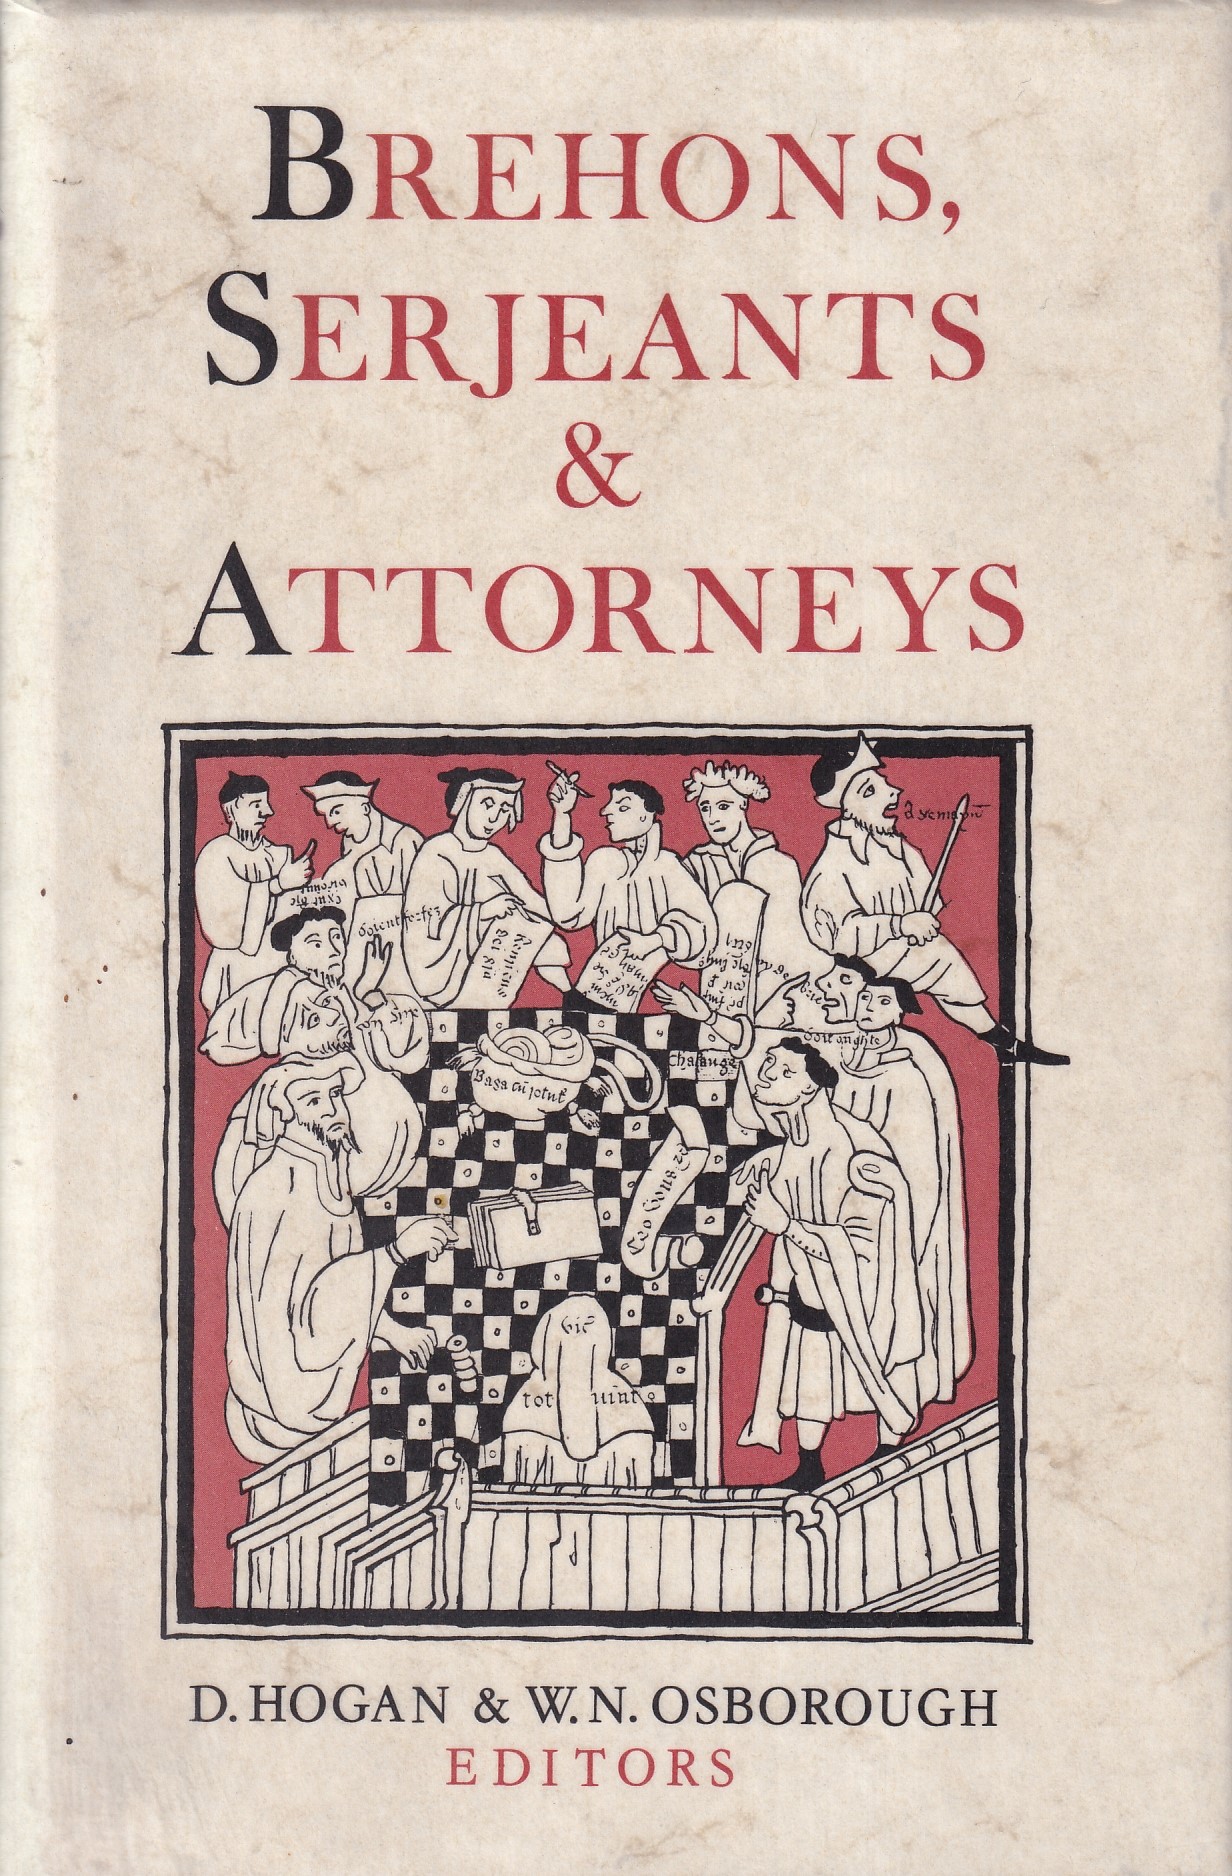 Brehons, Serjeants and Attorneys: Studies in the History of the Irish Legal Profession by D. Hogan & W. N. Osborough (eds.)